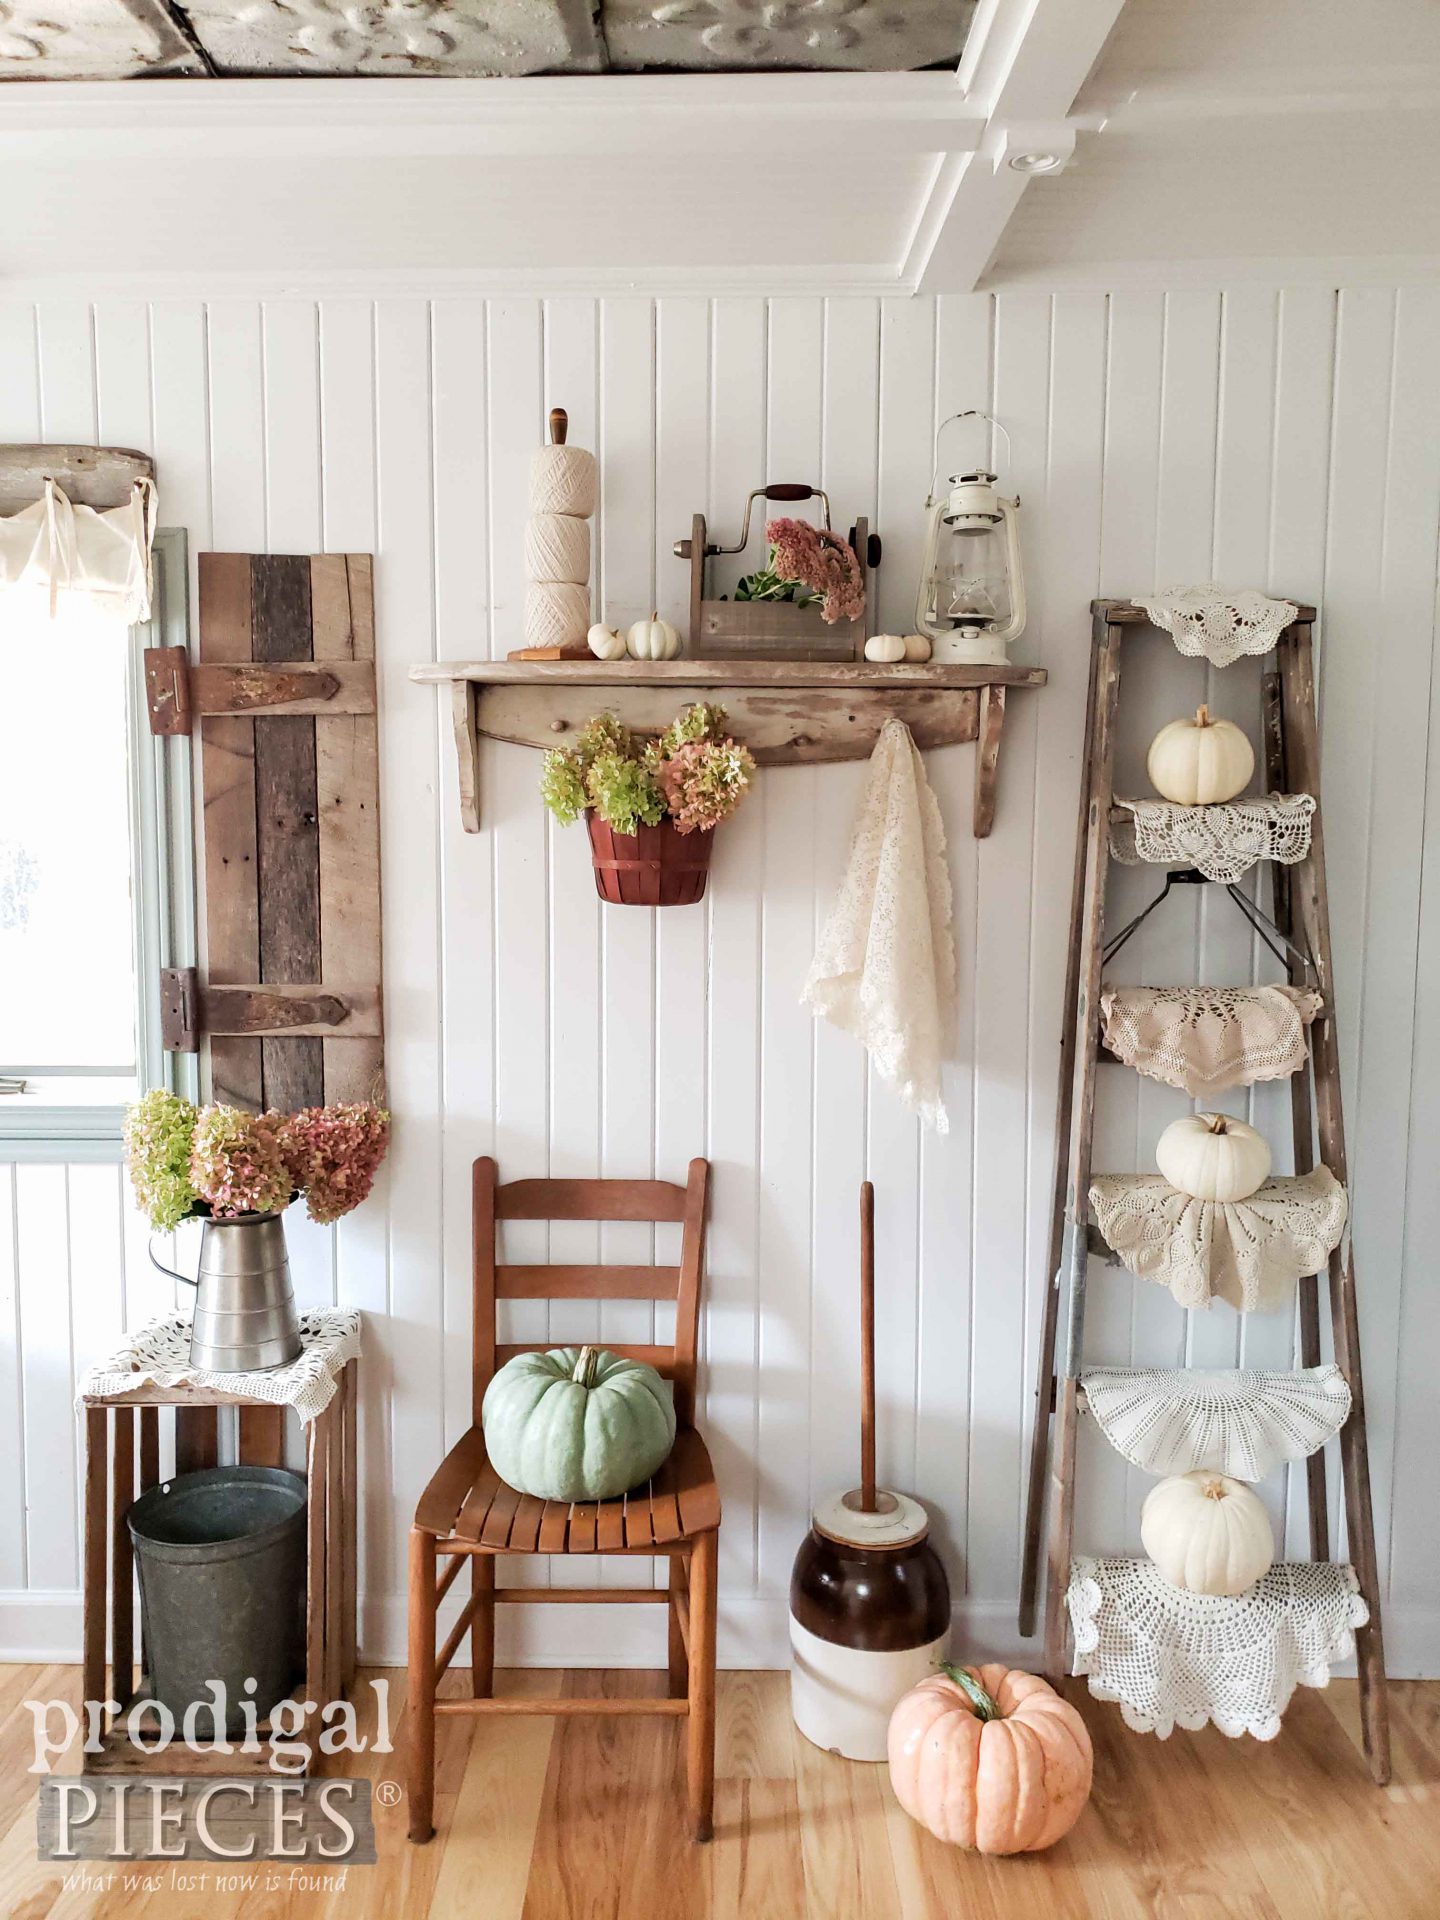 Rustic Farmhouse Fall Vignette by Larissa of Prodigal Pieces | See the video demo at prodigalpieces.com #prodigalpieces #farmhouse #fall #diy #autumn #home #homedecor